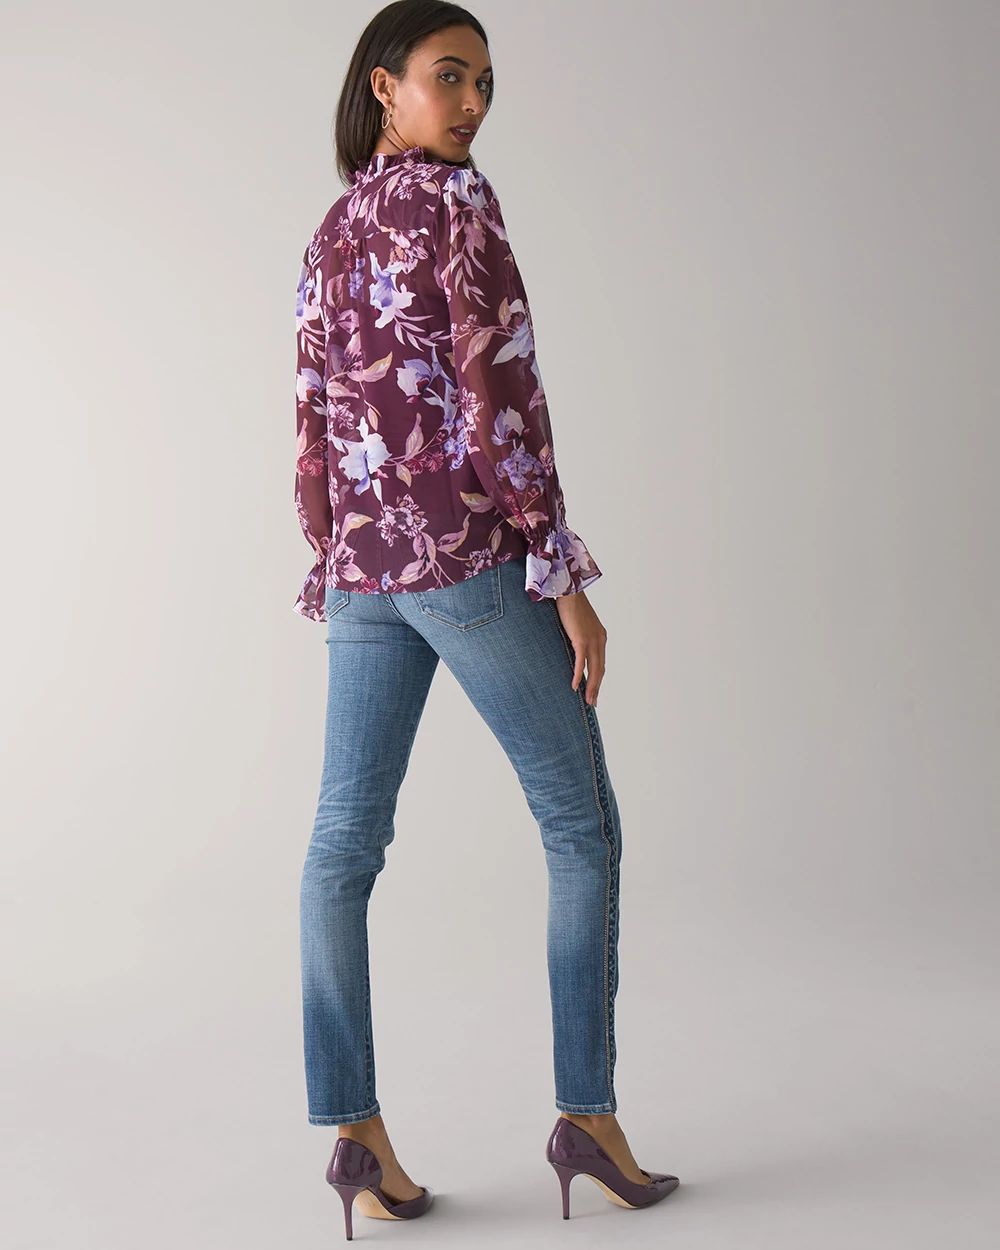 Long Sleeve Tie Neck Printed Blouse click to view larger image.